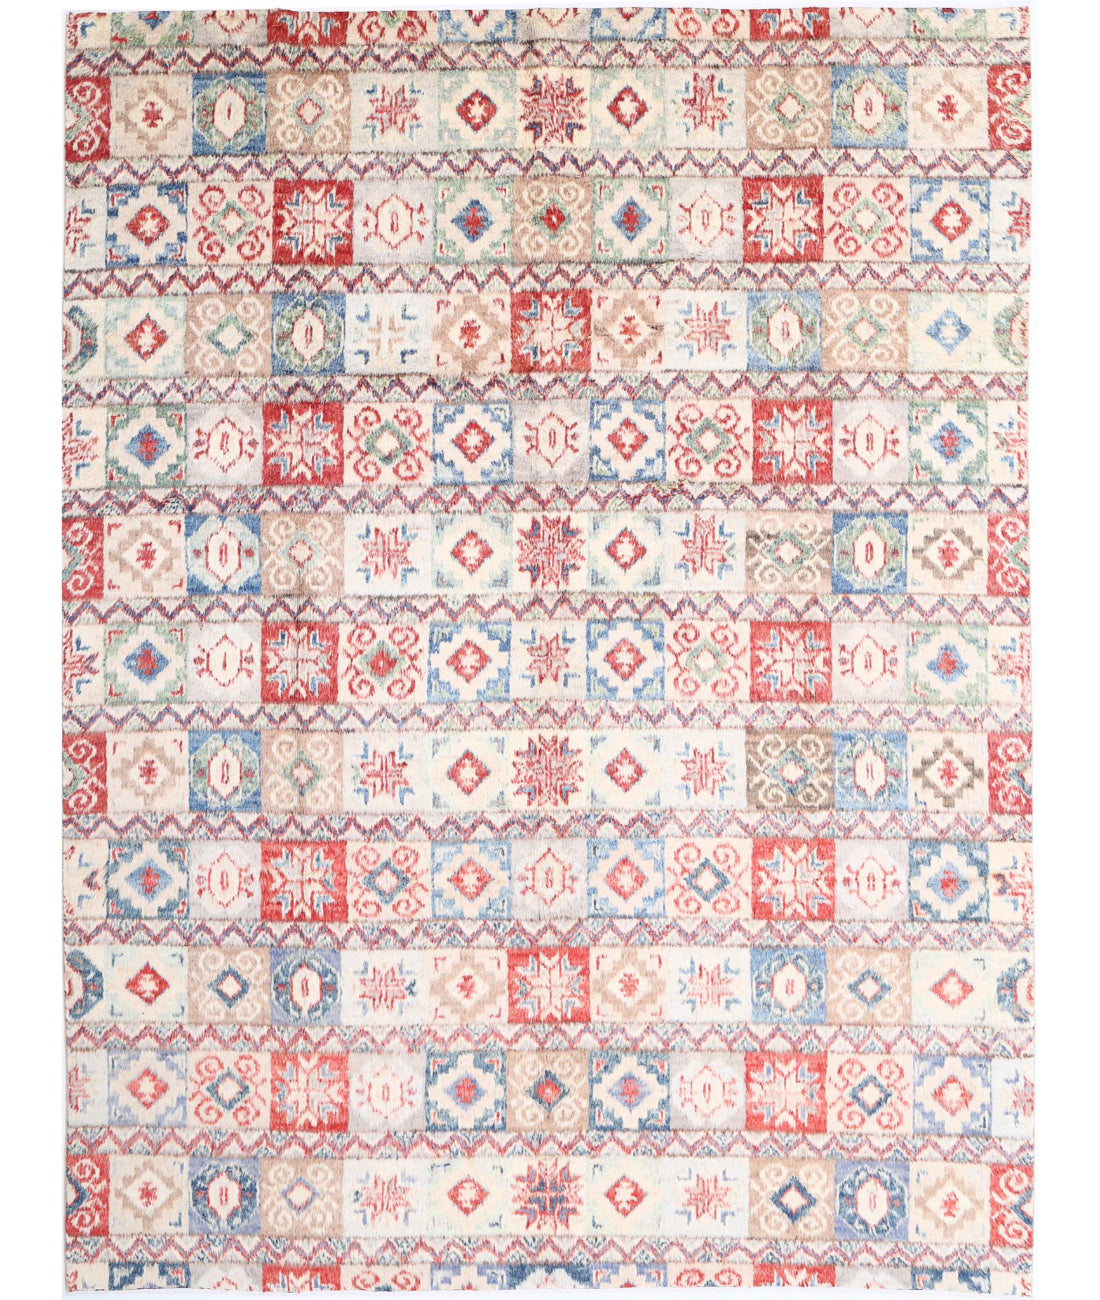 Hand Knotted Tribal Moroccan Wool Rug - 10'8'' x 13'10'' 10'8'' x 13'10'' (320 X 415) / Multi / Multi